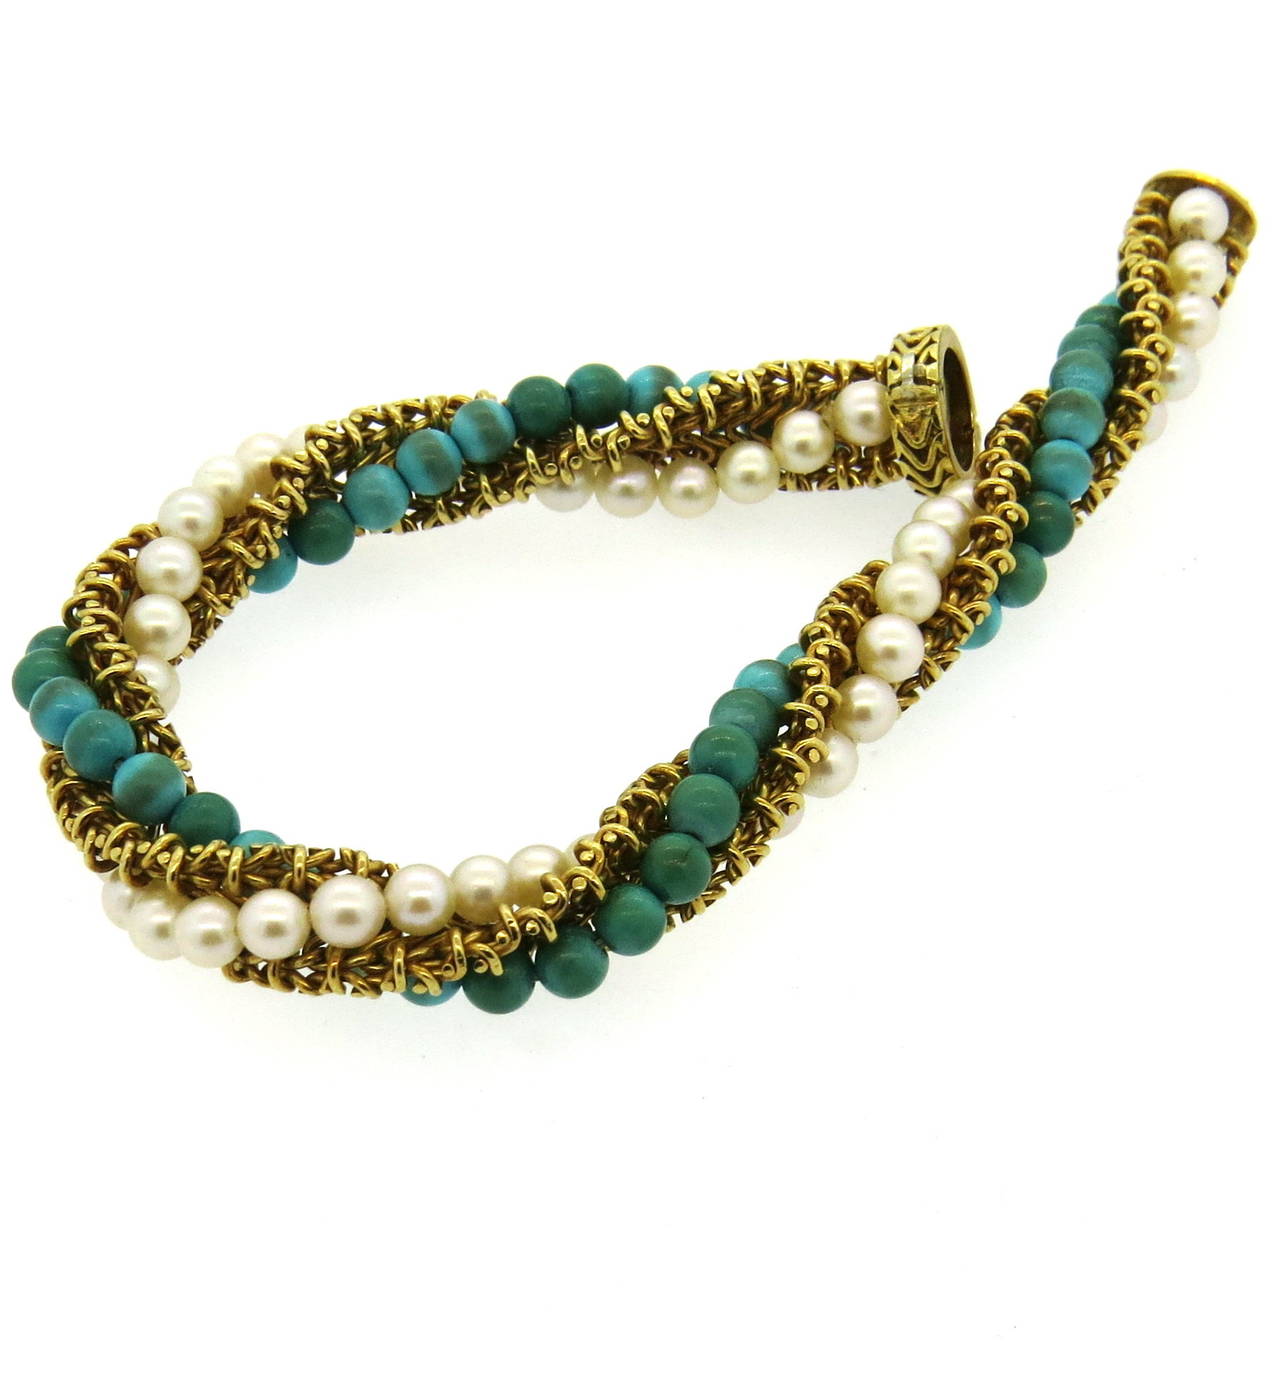 1960s 18k gold bracelet,set with 4.7mm turquoise stones and 4.5mm pearls. Bracelet is 8 1/4